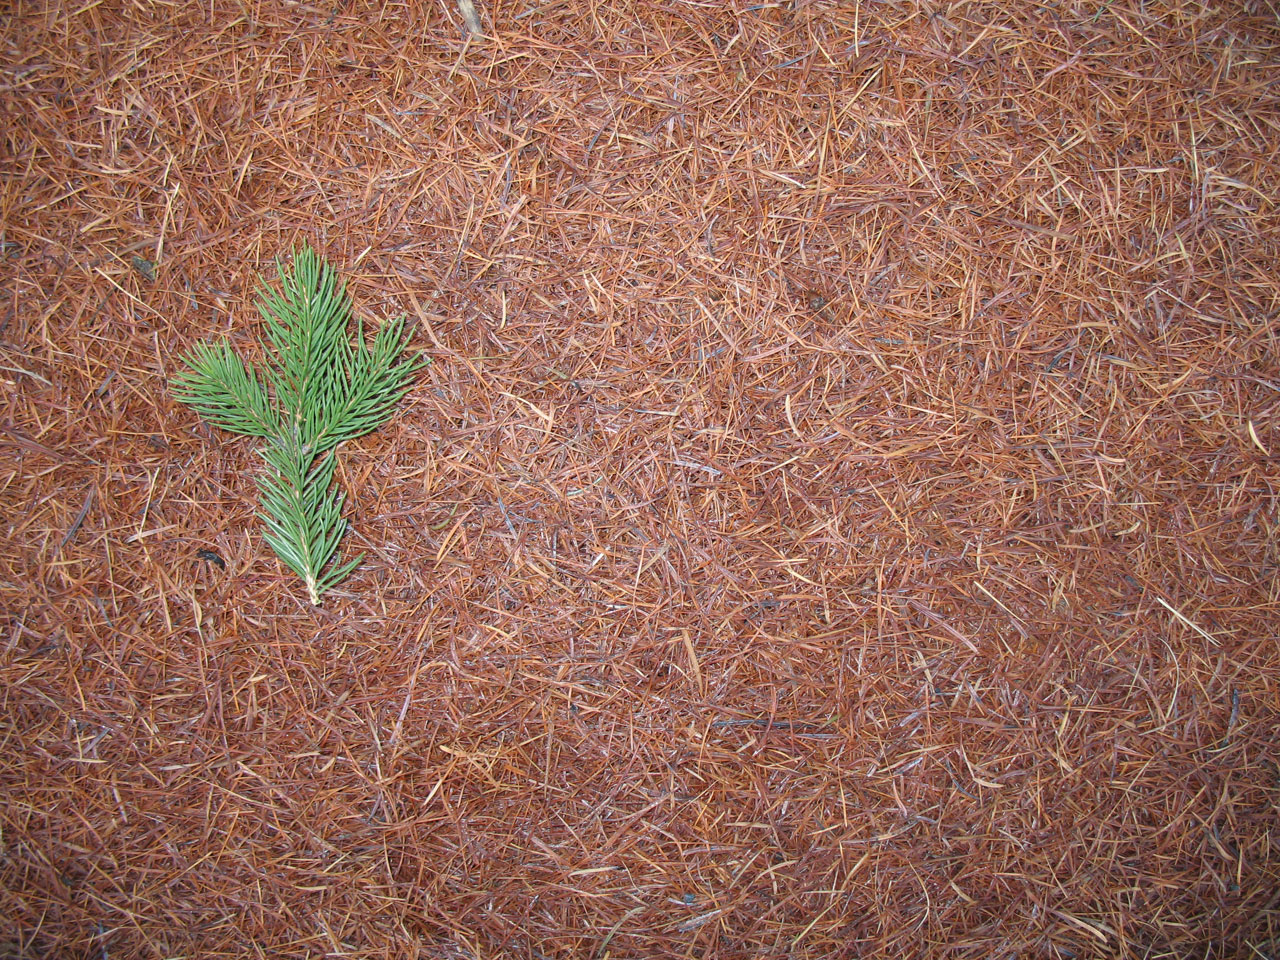 Brown needles on the surface with one tiny green branch